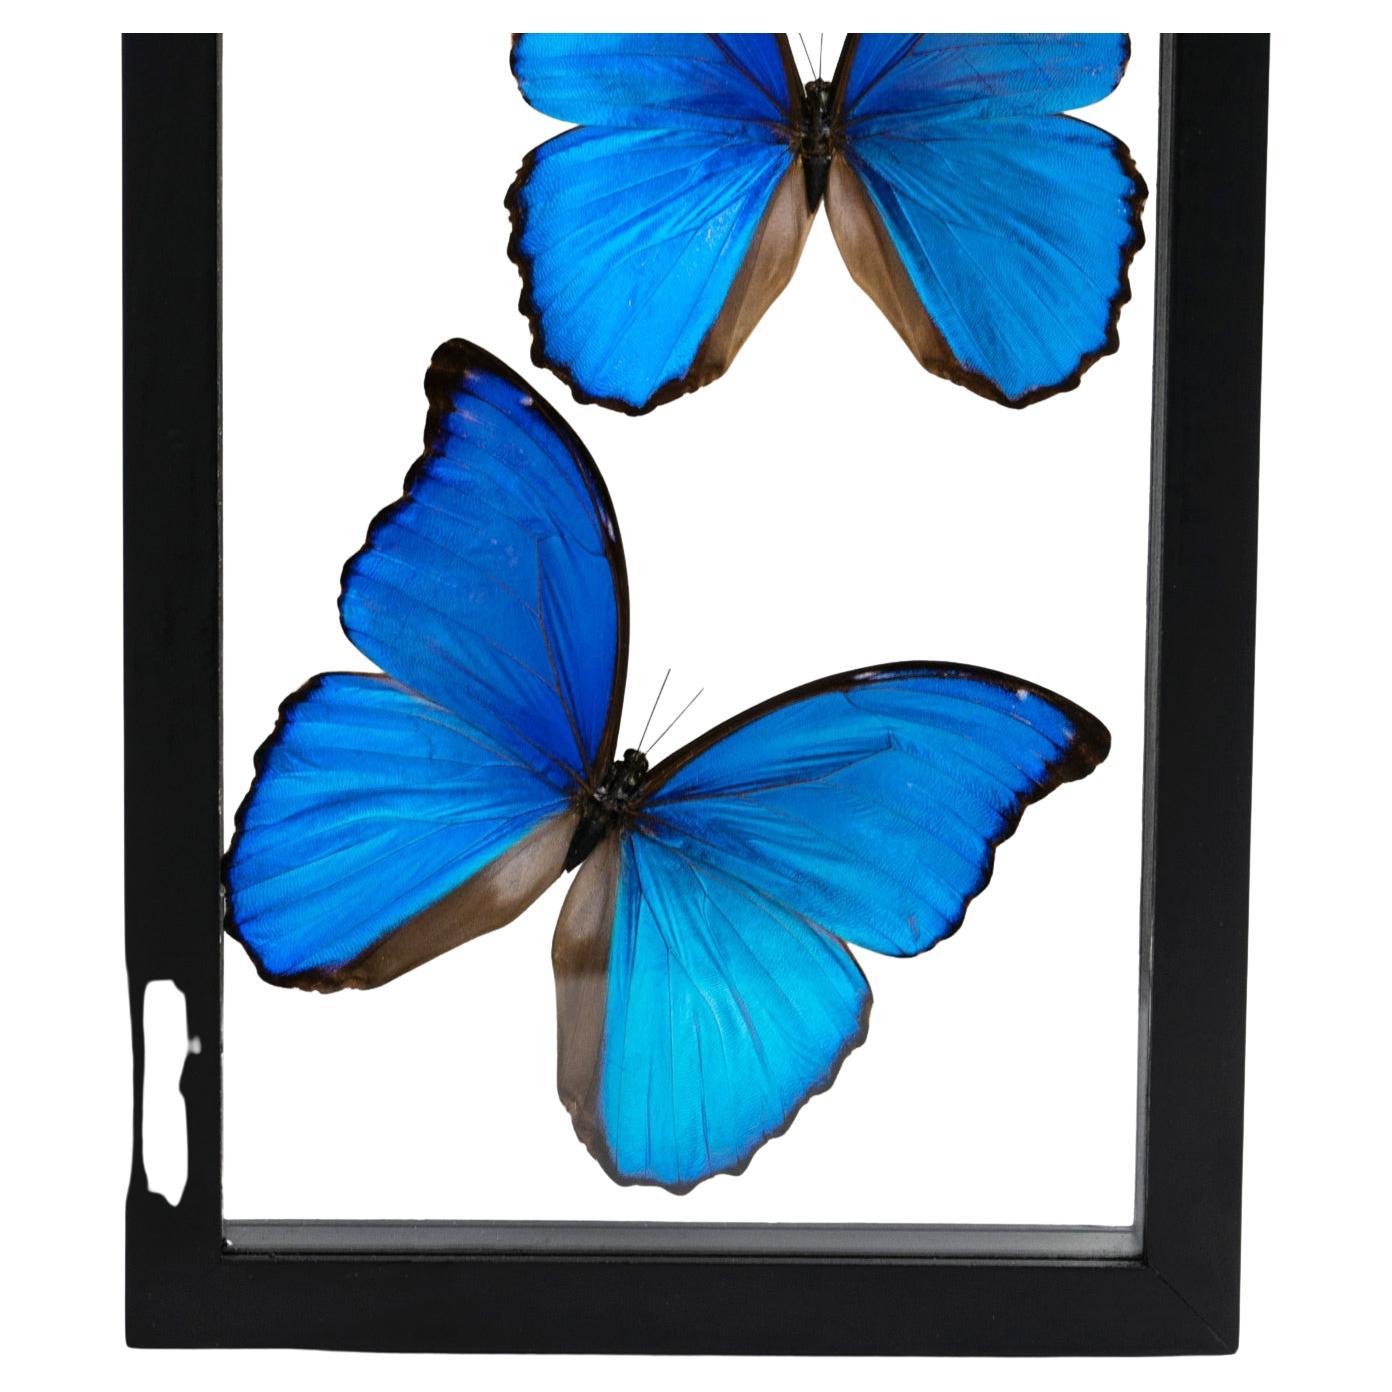 This beautiful framed display piece includes 7 large Peruvian Morpho butterflies that can be observed from both sides. The frame includes a keyhole hook at the top for mounting the display on a wall. The butterfly in this frame are raised on